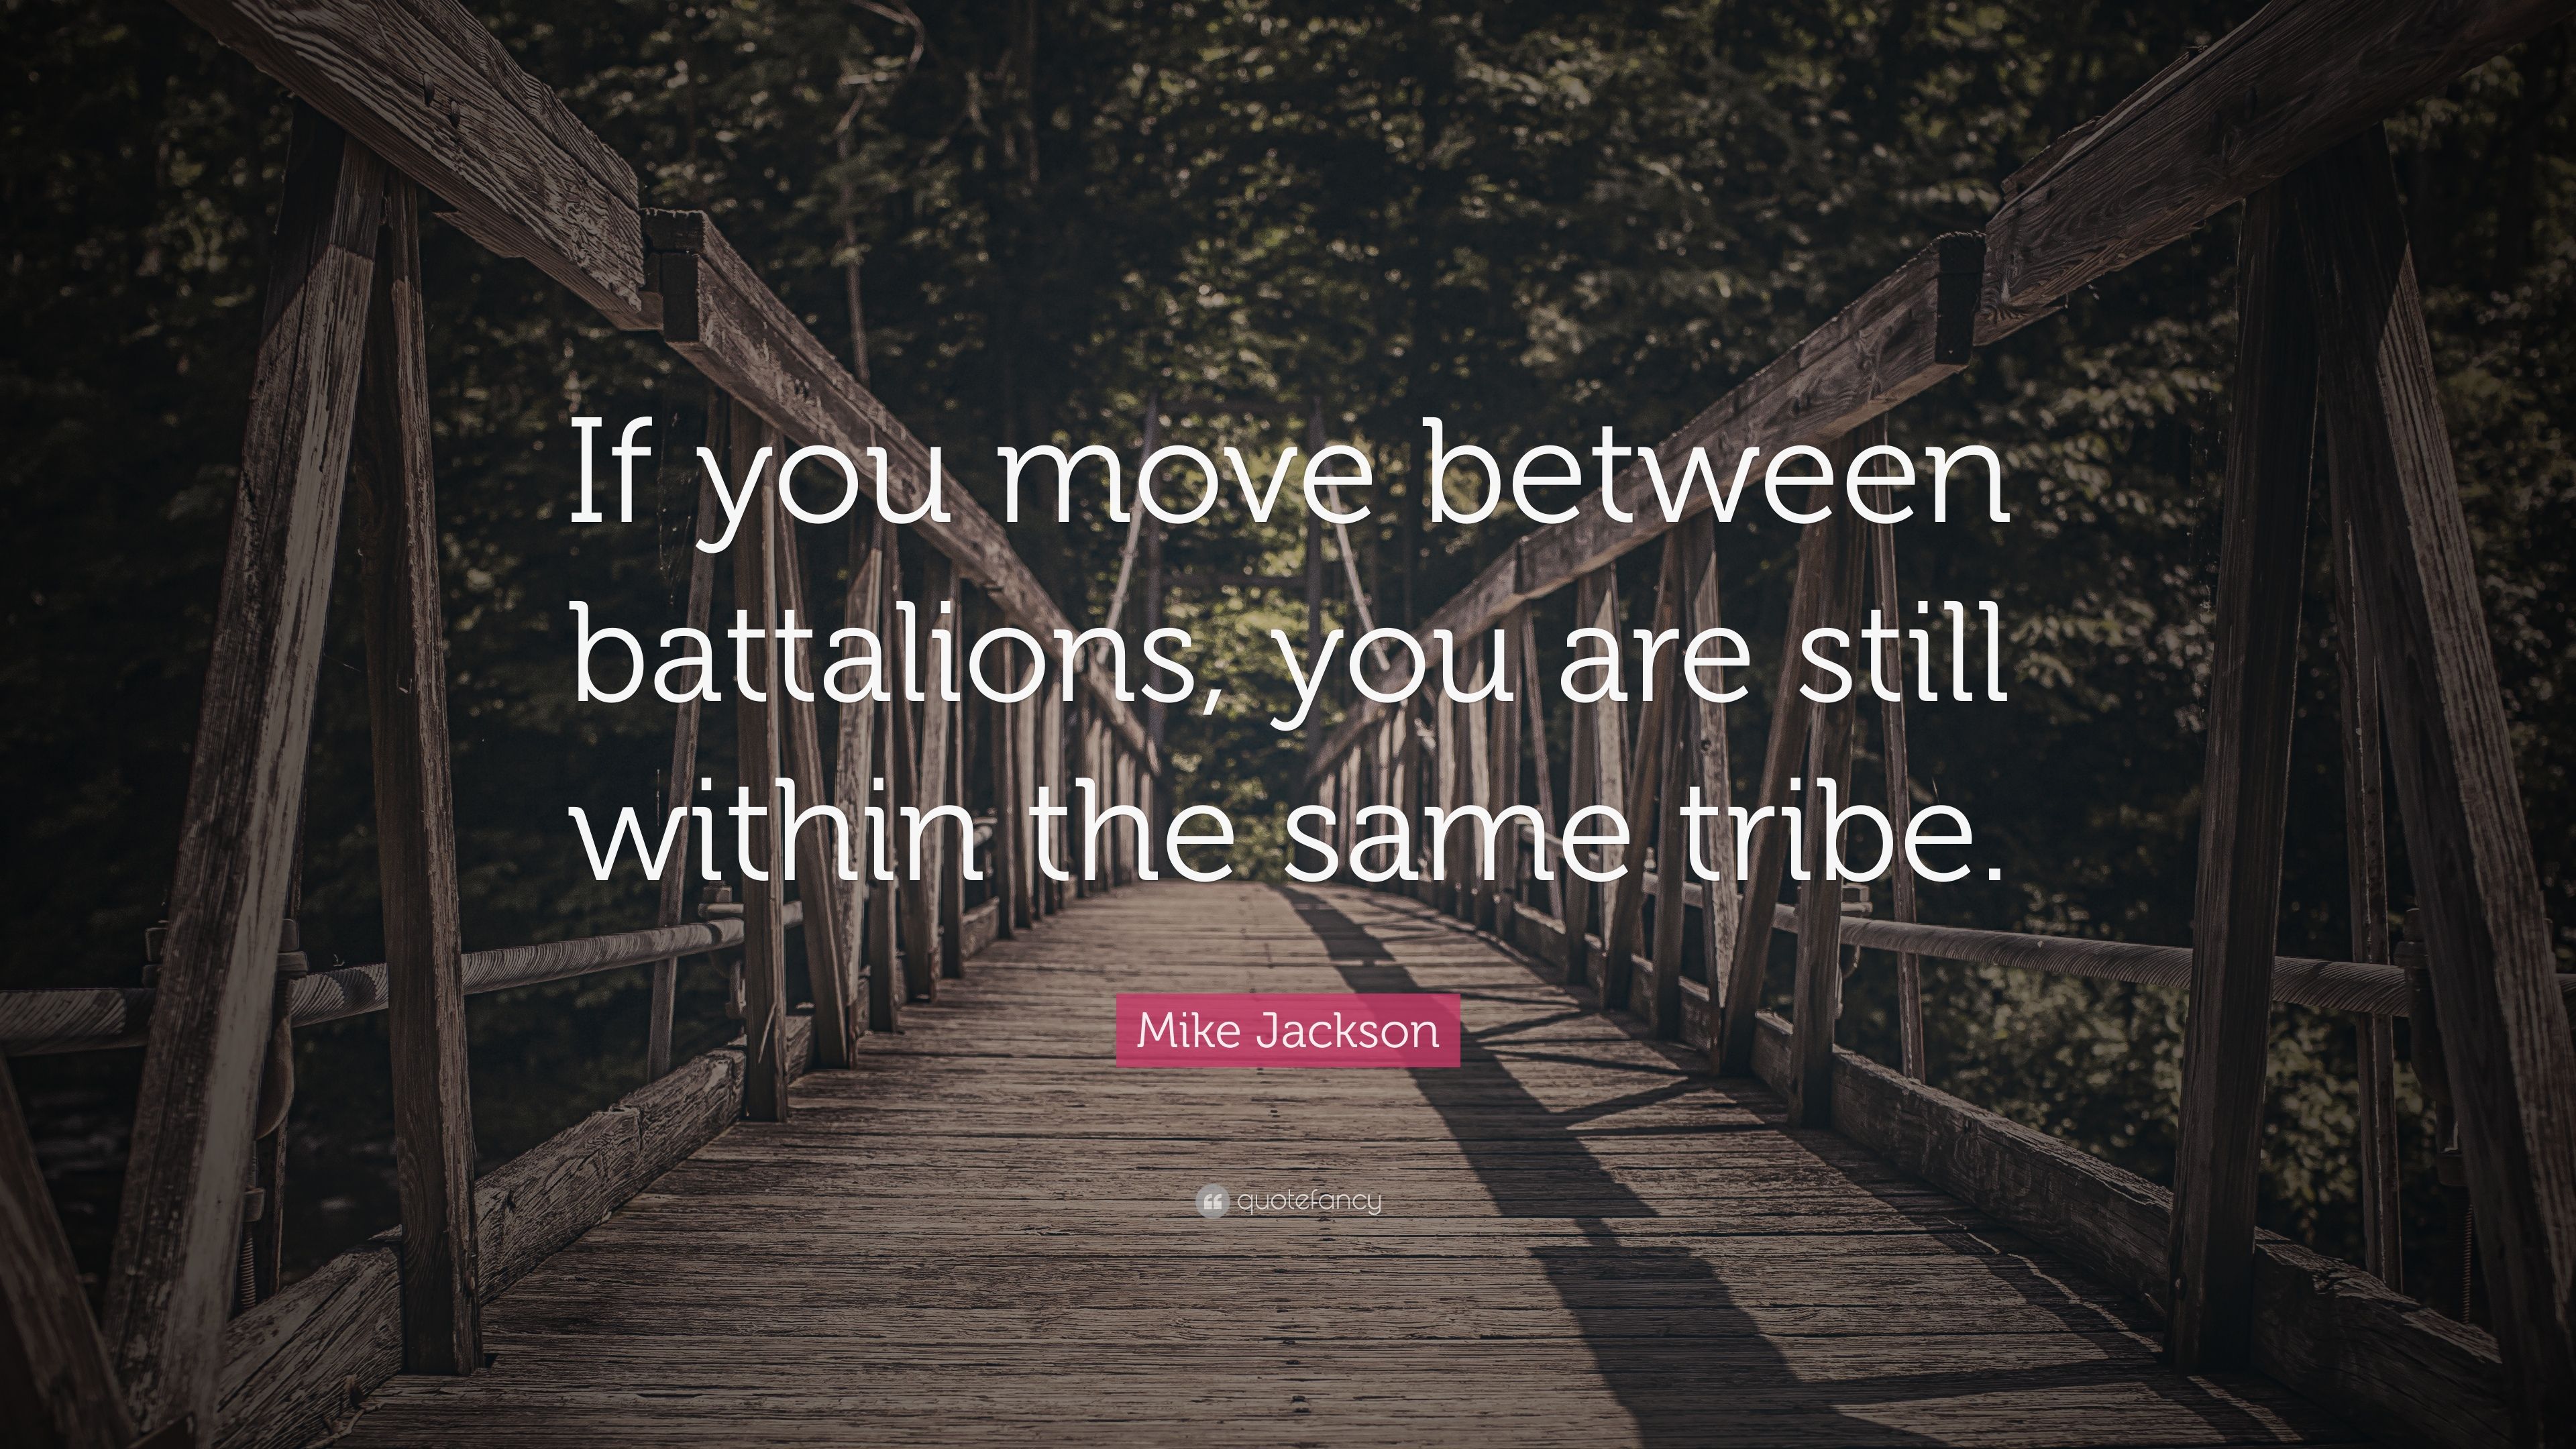 Mike Jackson Quote: “If you move between battalions, you are still